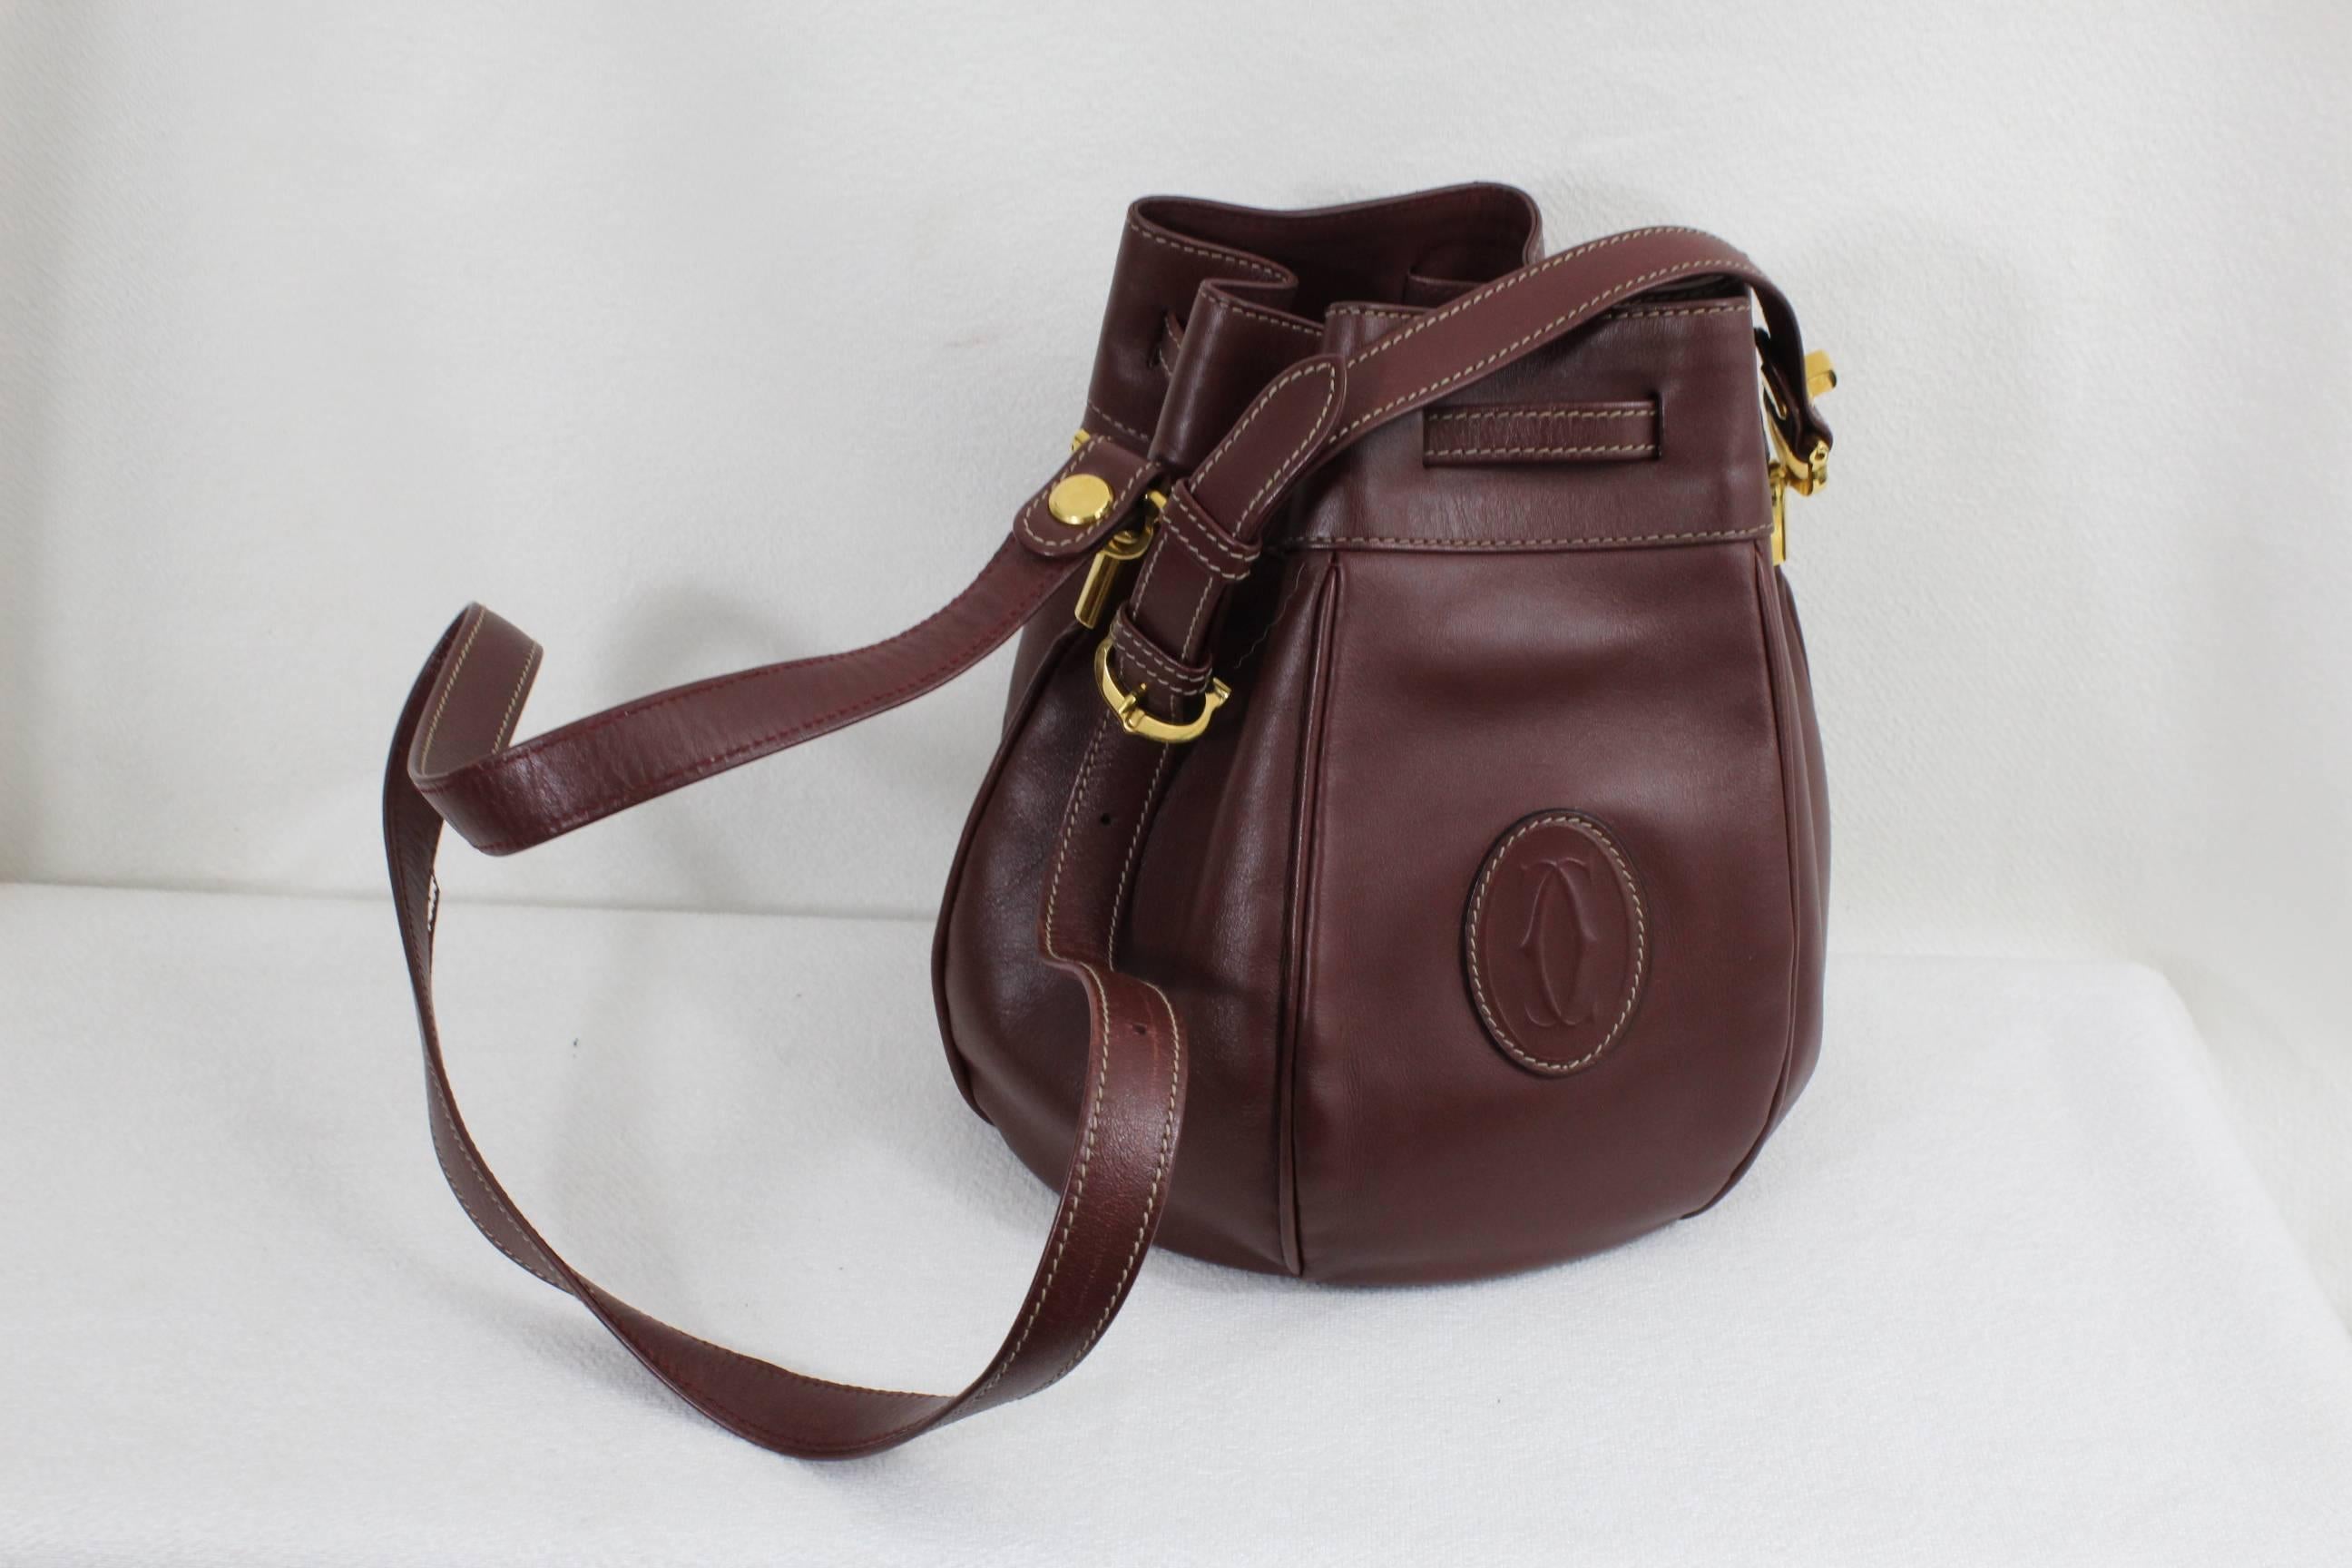 Nice Cartier Bucket Bag in Burgundy Leather and Interor in Linen.

This modle has been edited again by Cartier at a price of more than 1600$

Really good condition.

Size 19x23 cm

Sold with Catier Dust Bag